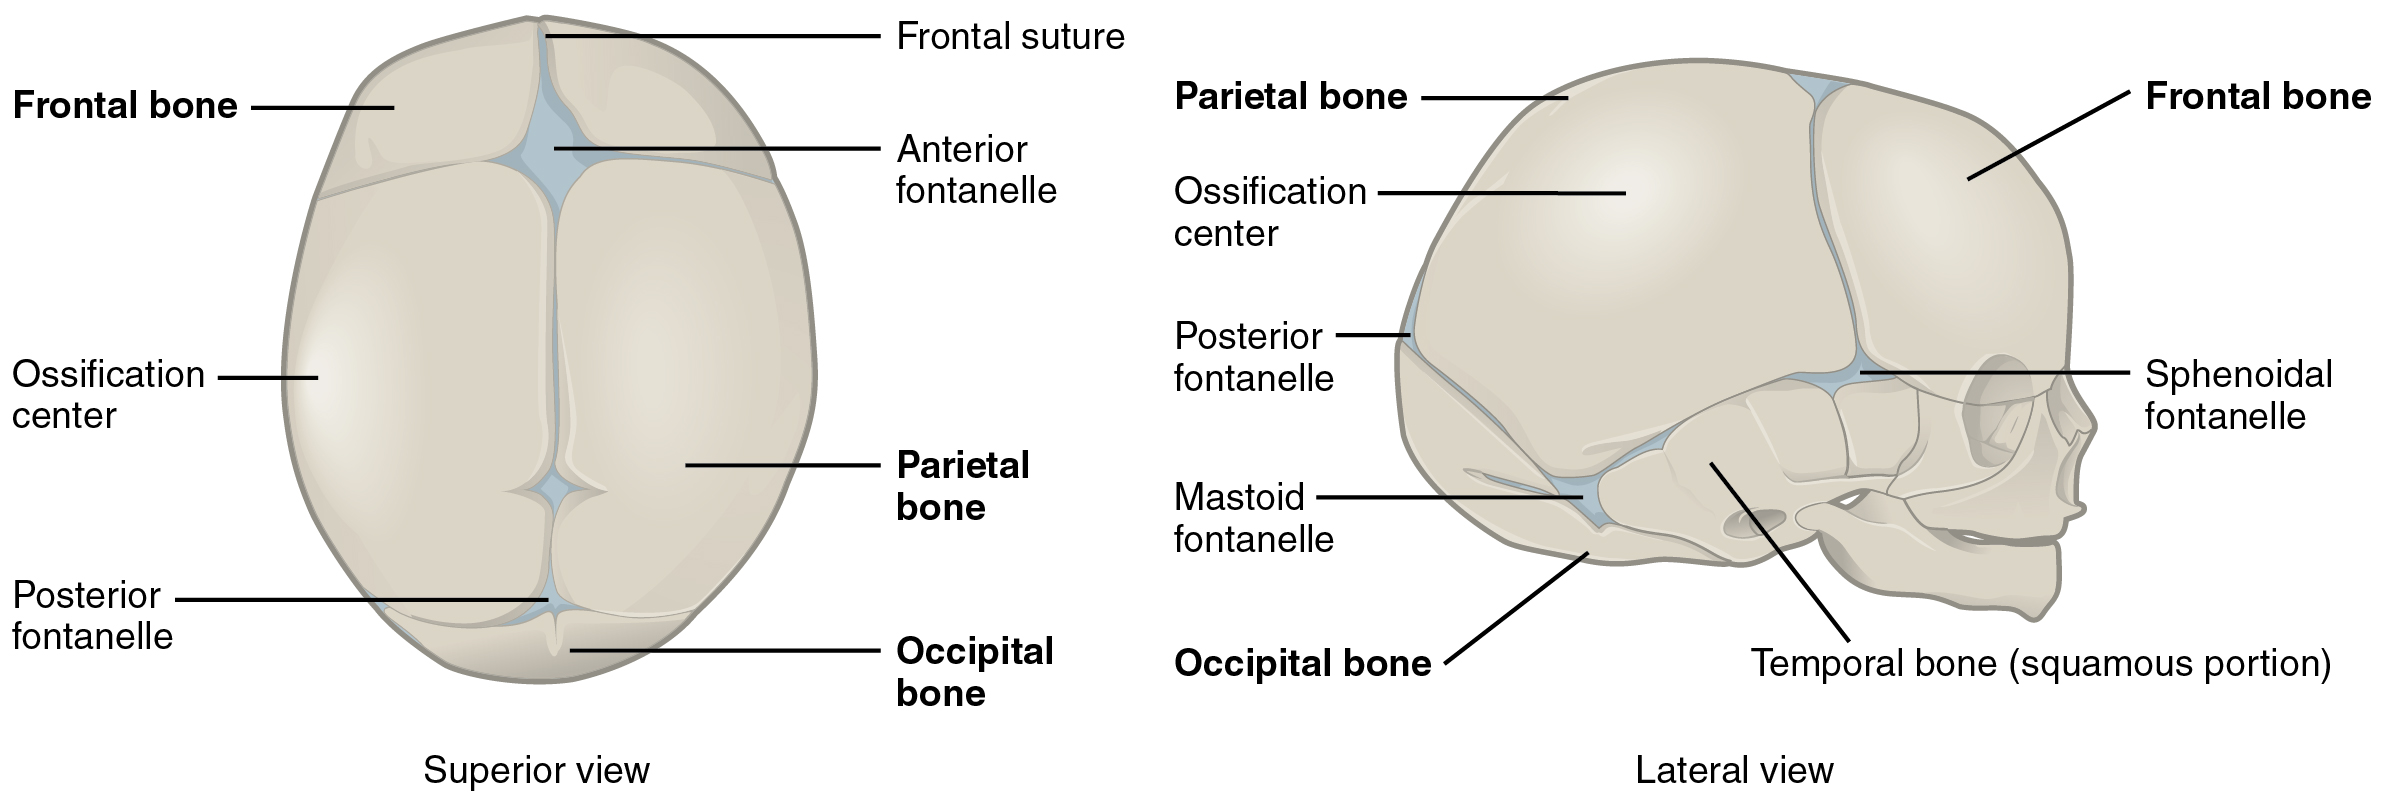 Embryonic Development Of The Axial Skeleton